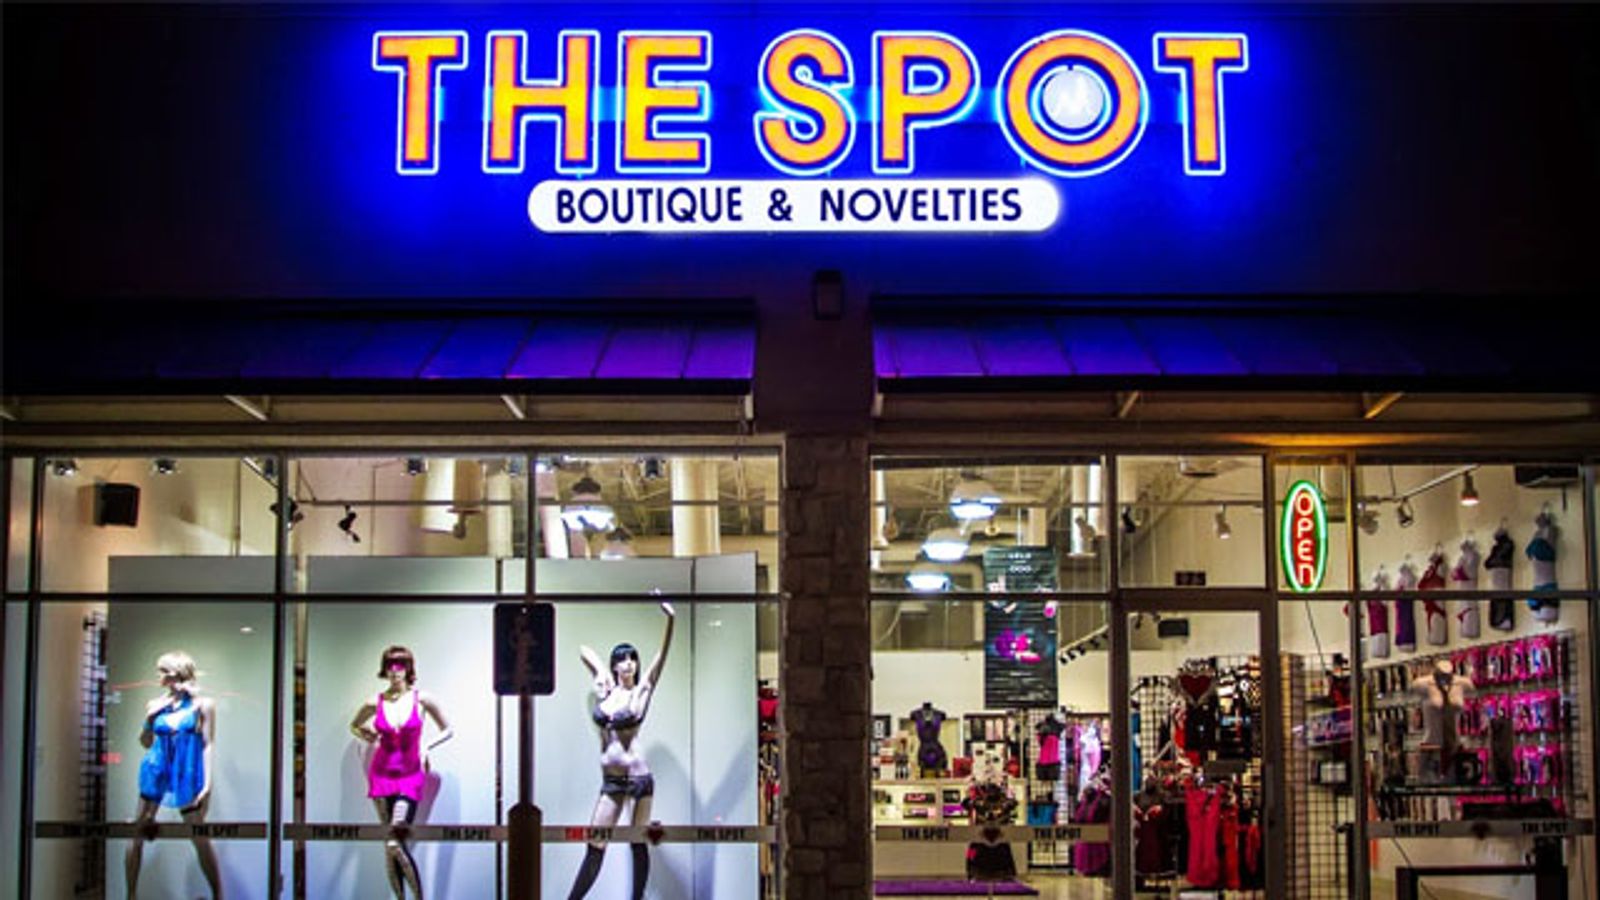 Owner Looking To Sell The Spot Boutique In Dallas